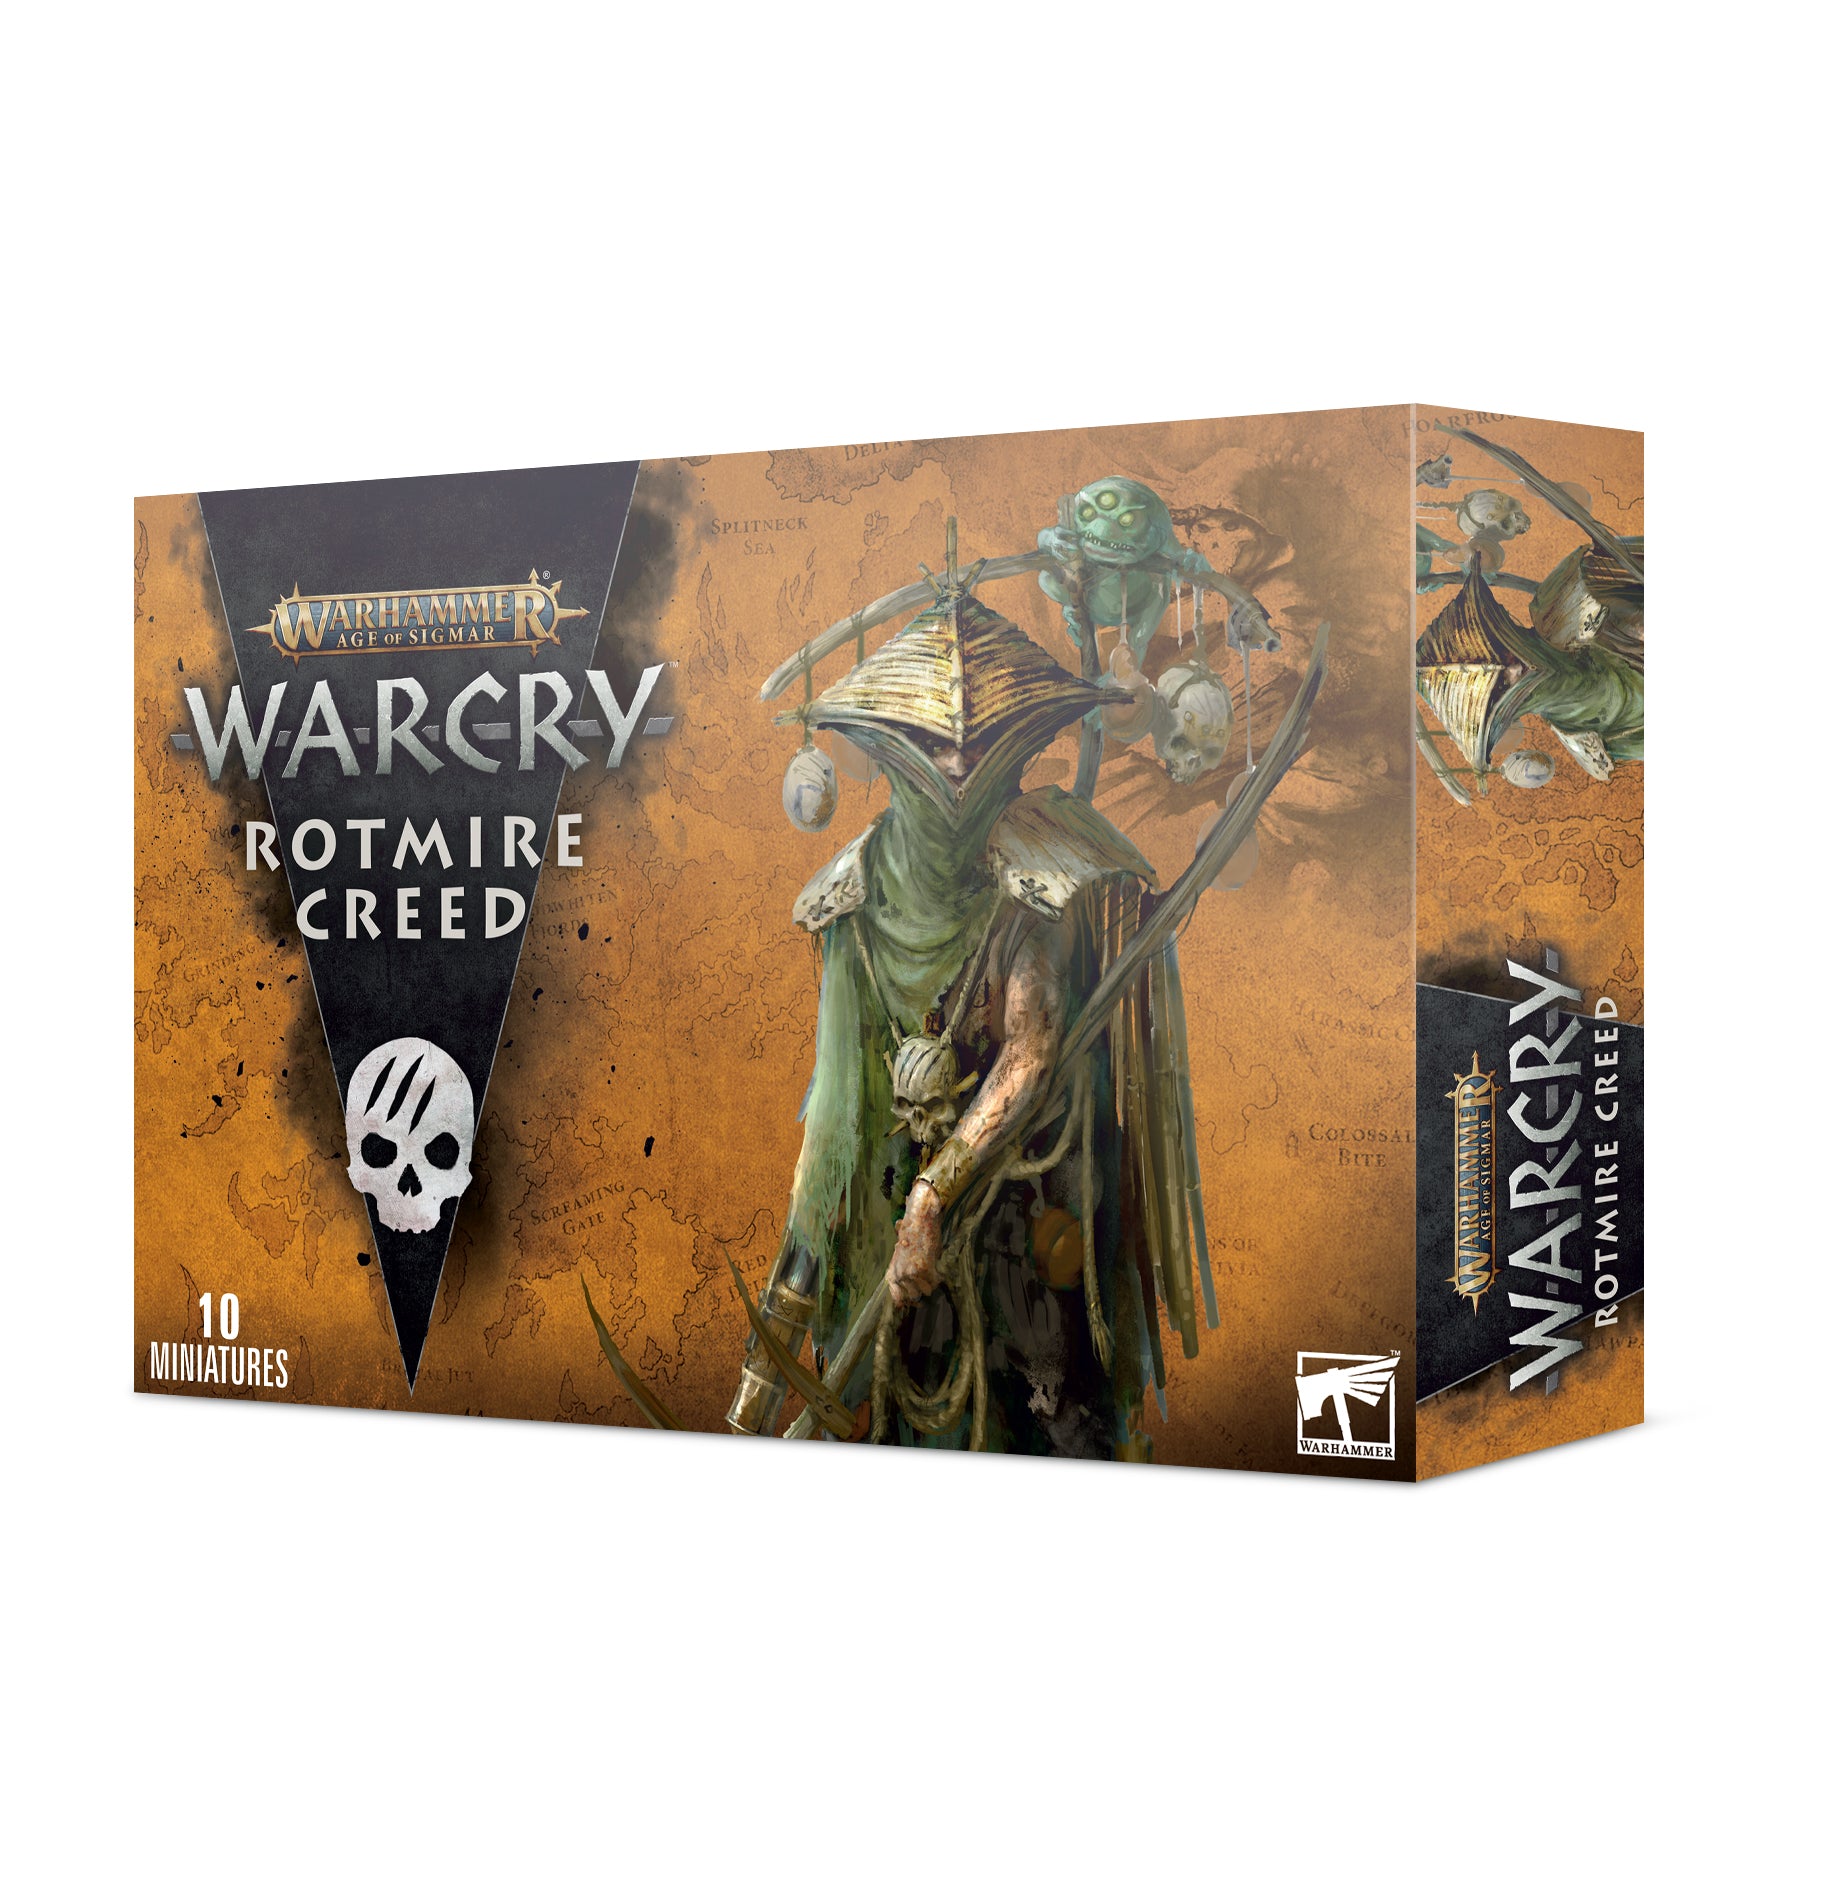 a box of warcry, a role playing card game